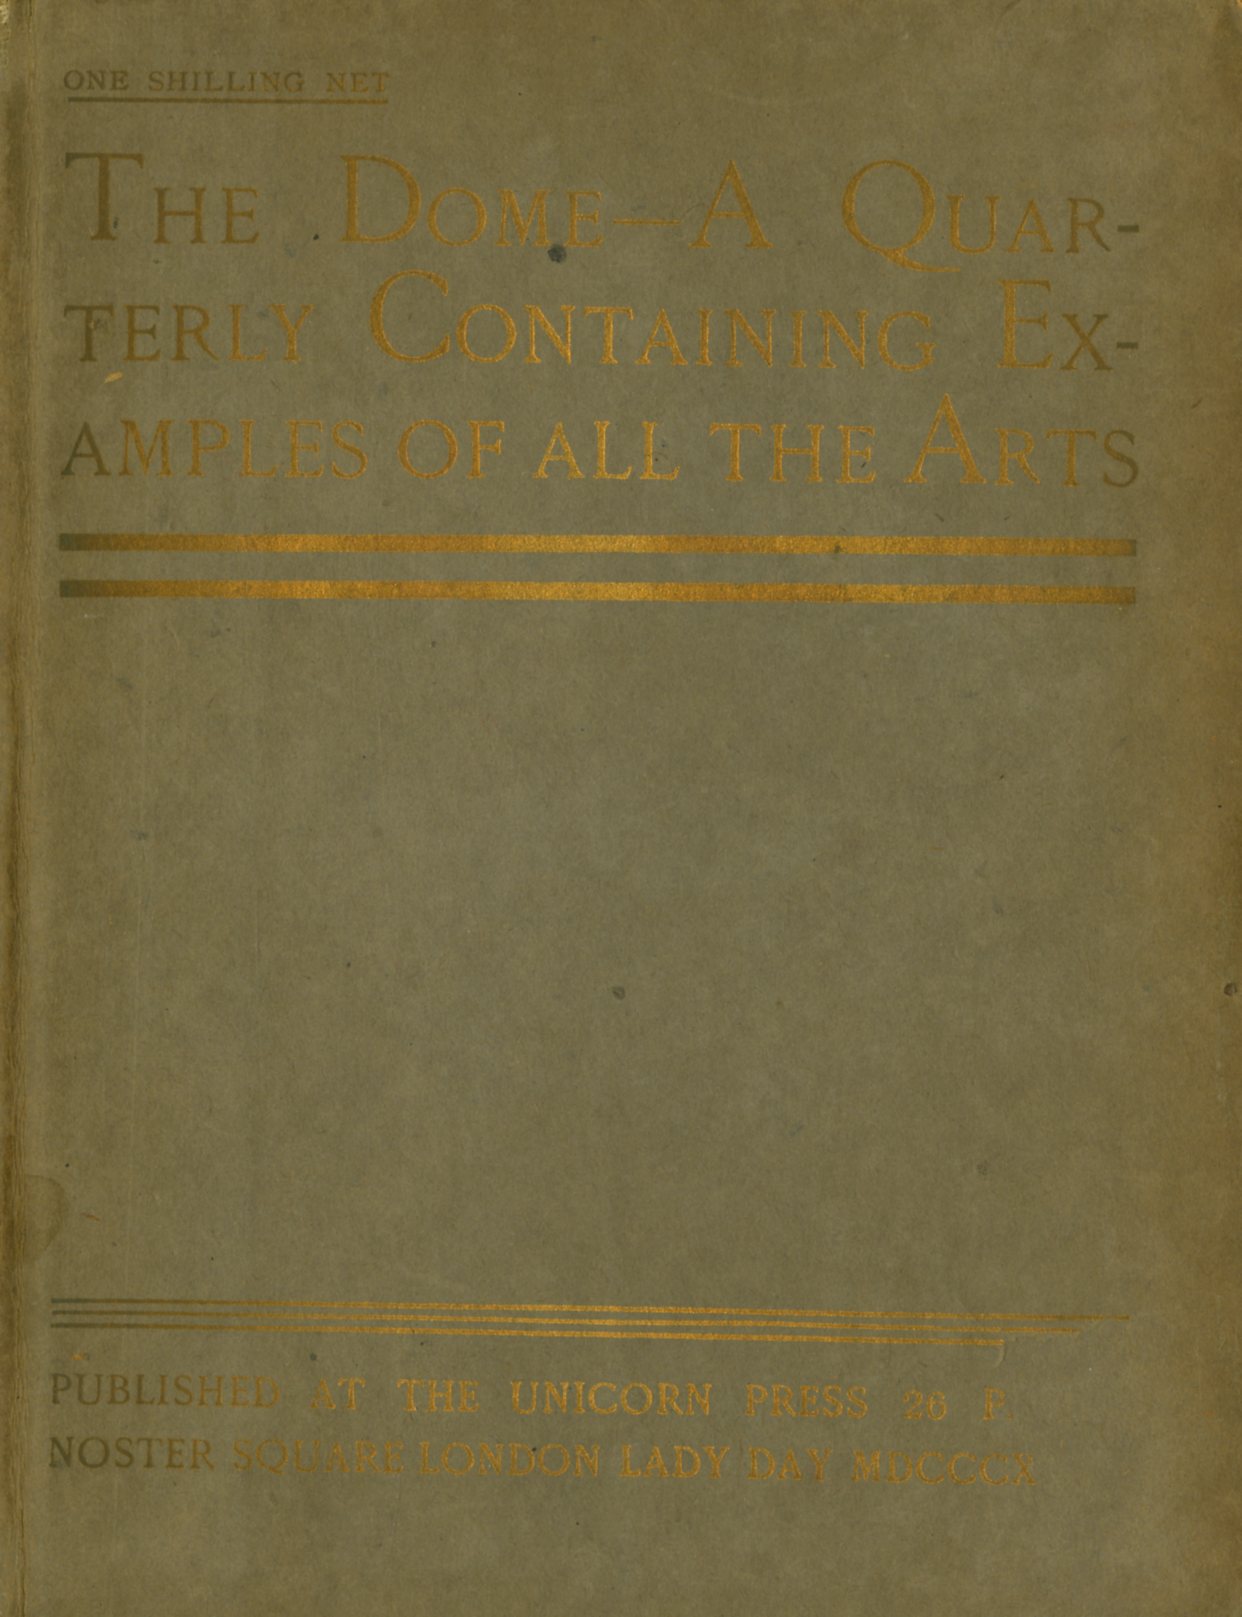 [Yeats (W.B.)] The Dome - A Quarterly containing Examples of All the Arts.